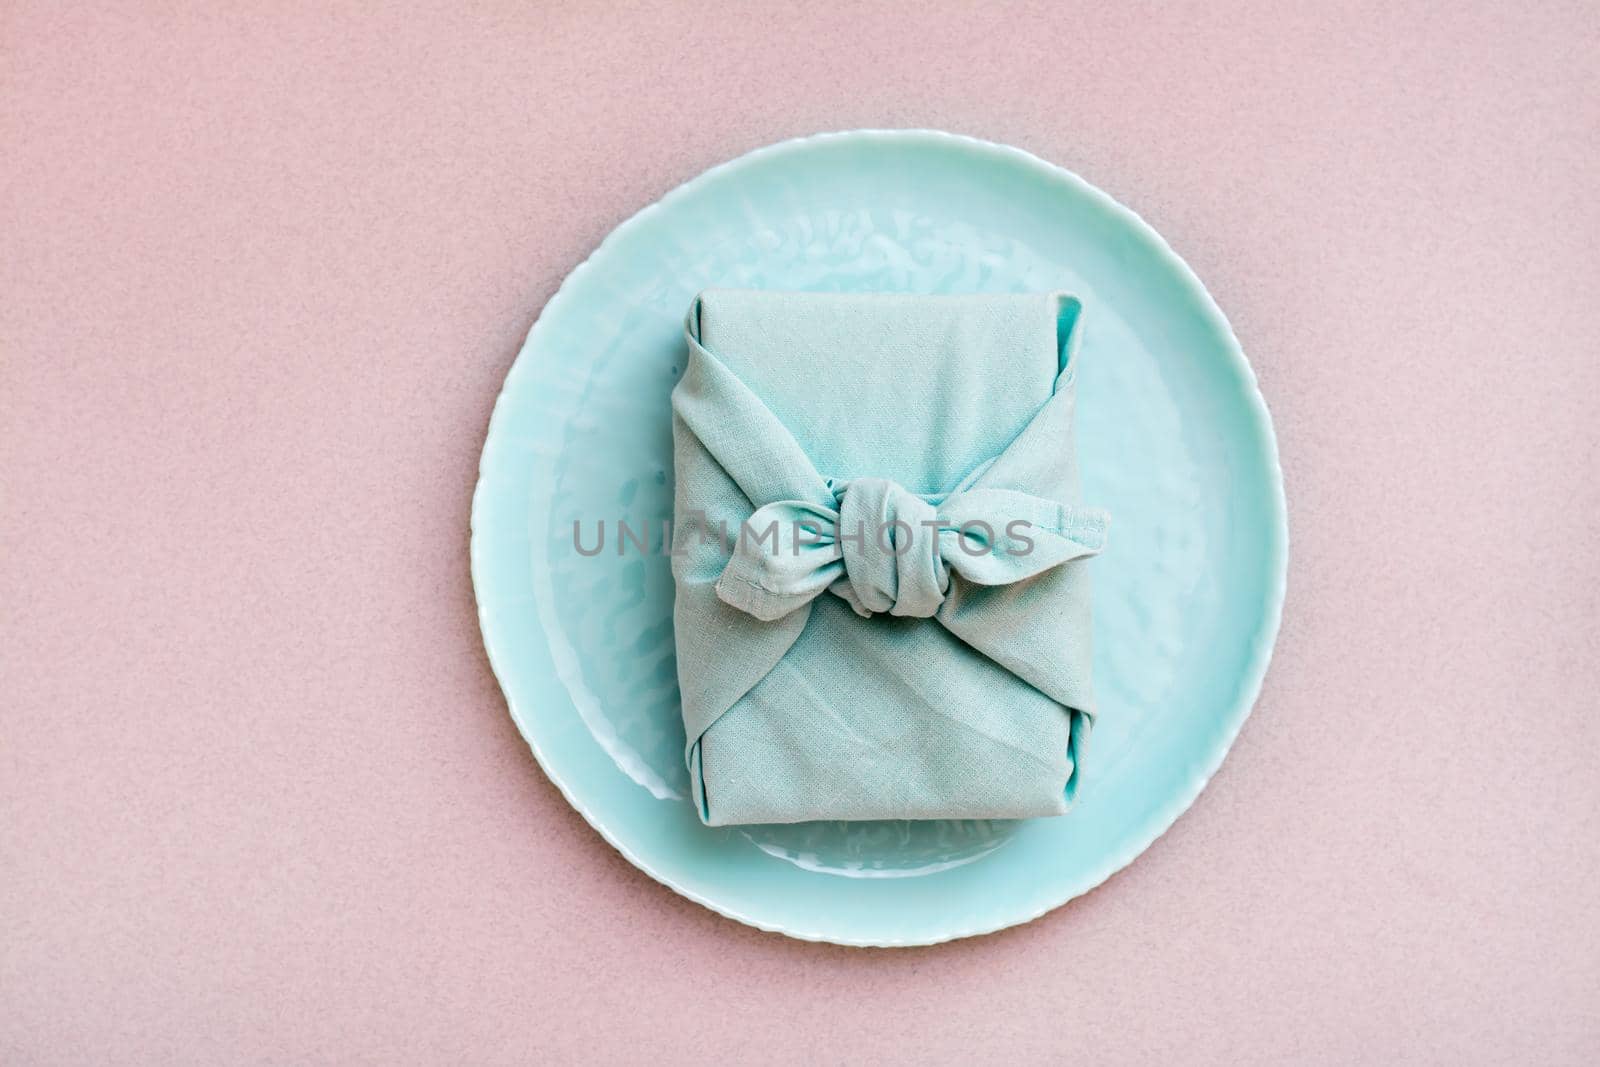 Eco-friendly gift - a box wrapped in cloth on a plate on a gray background. Minimalism by Aleruana